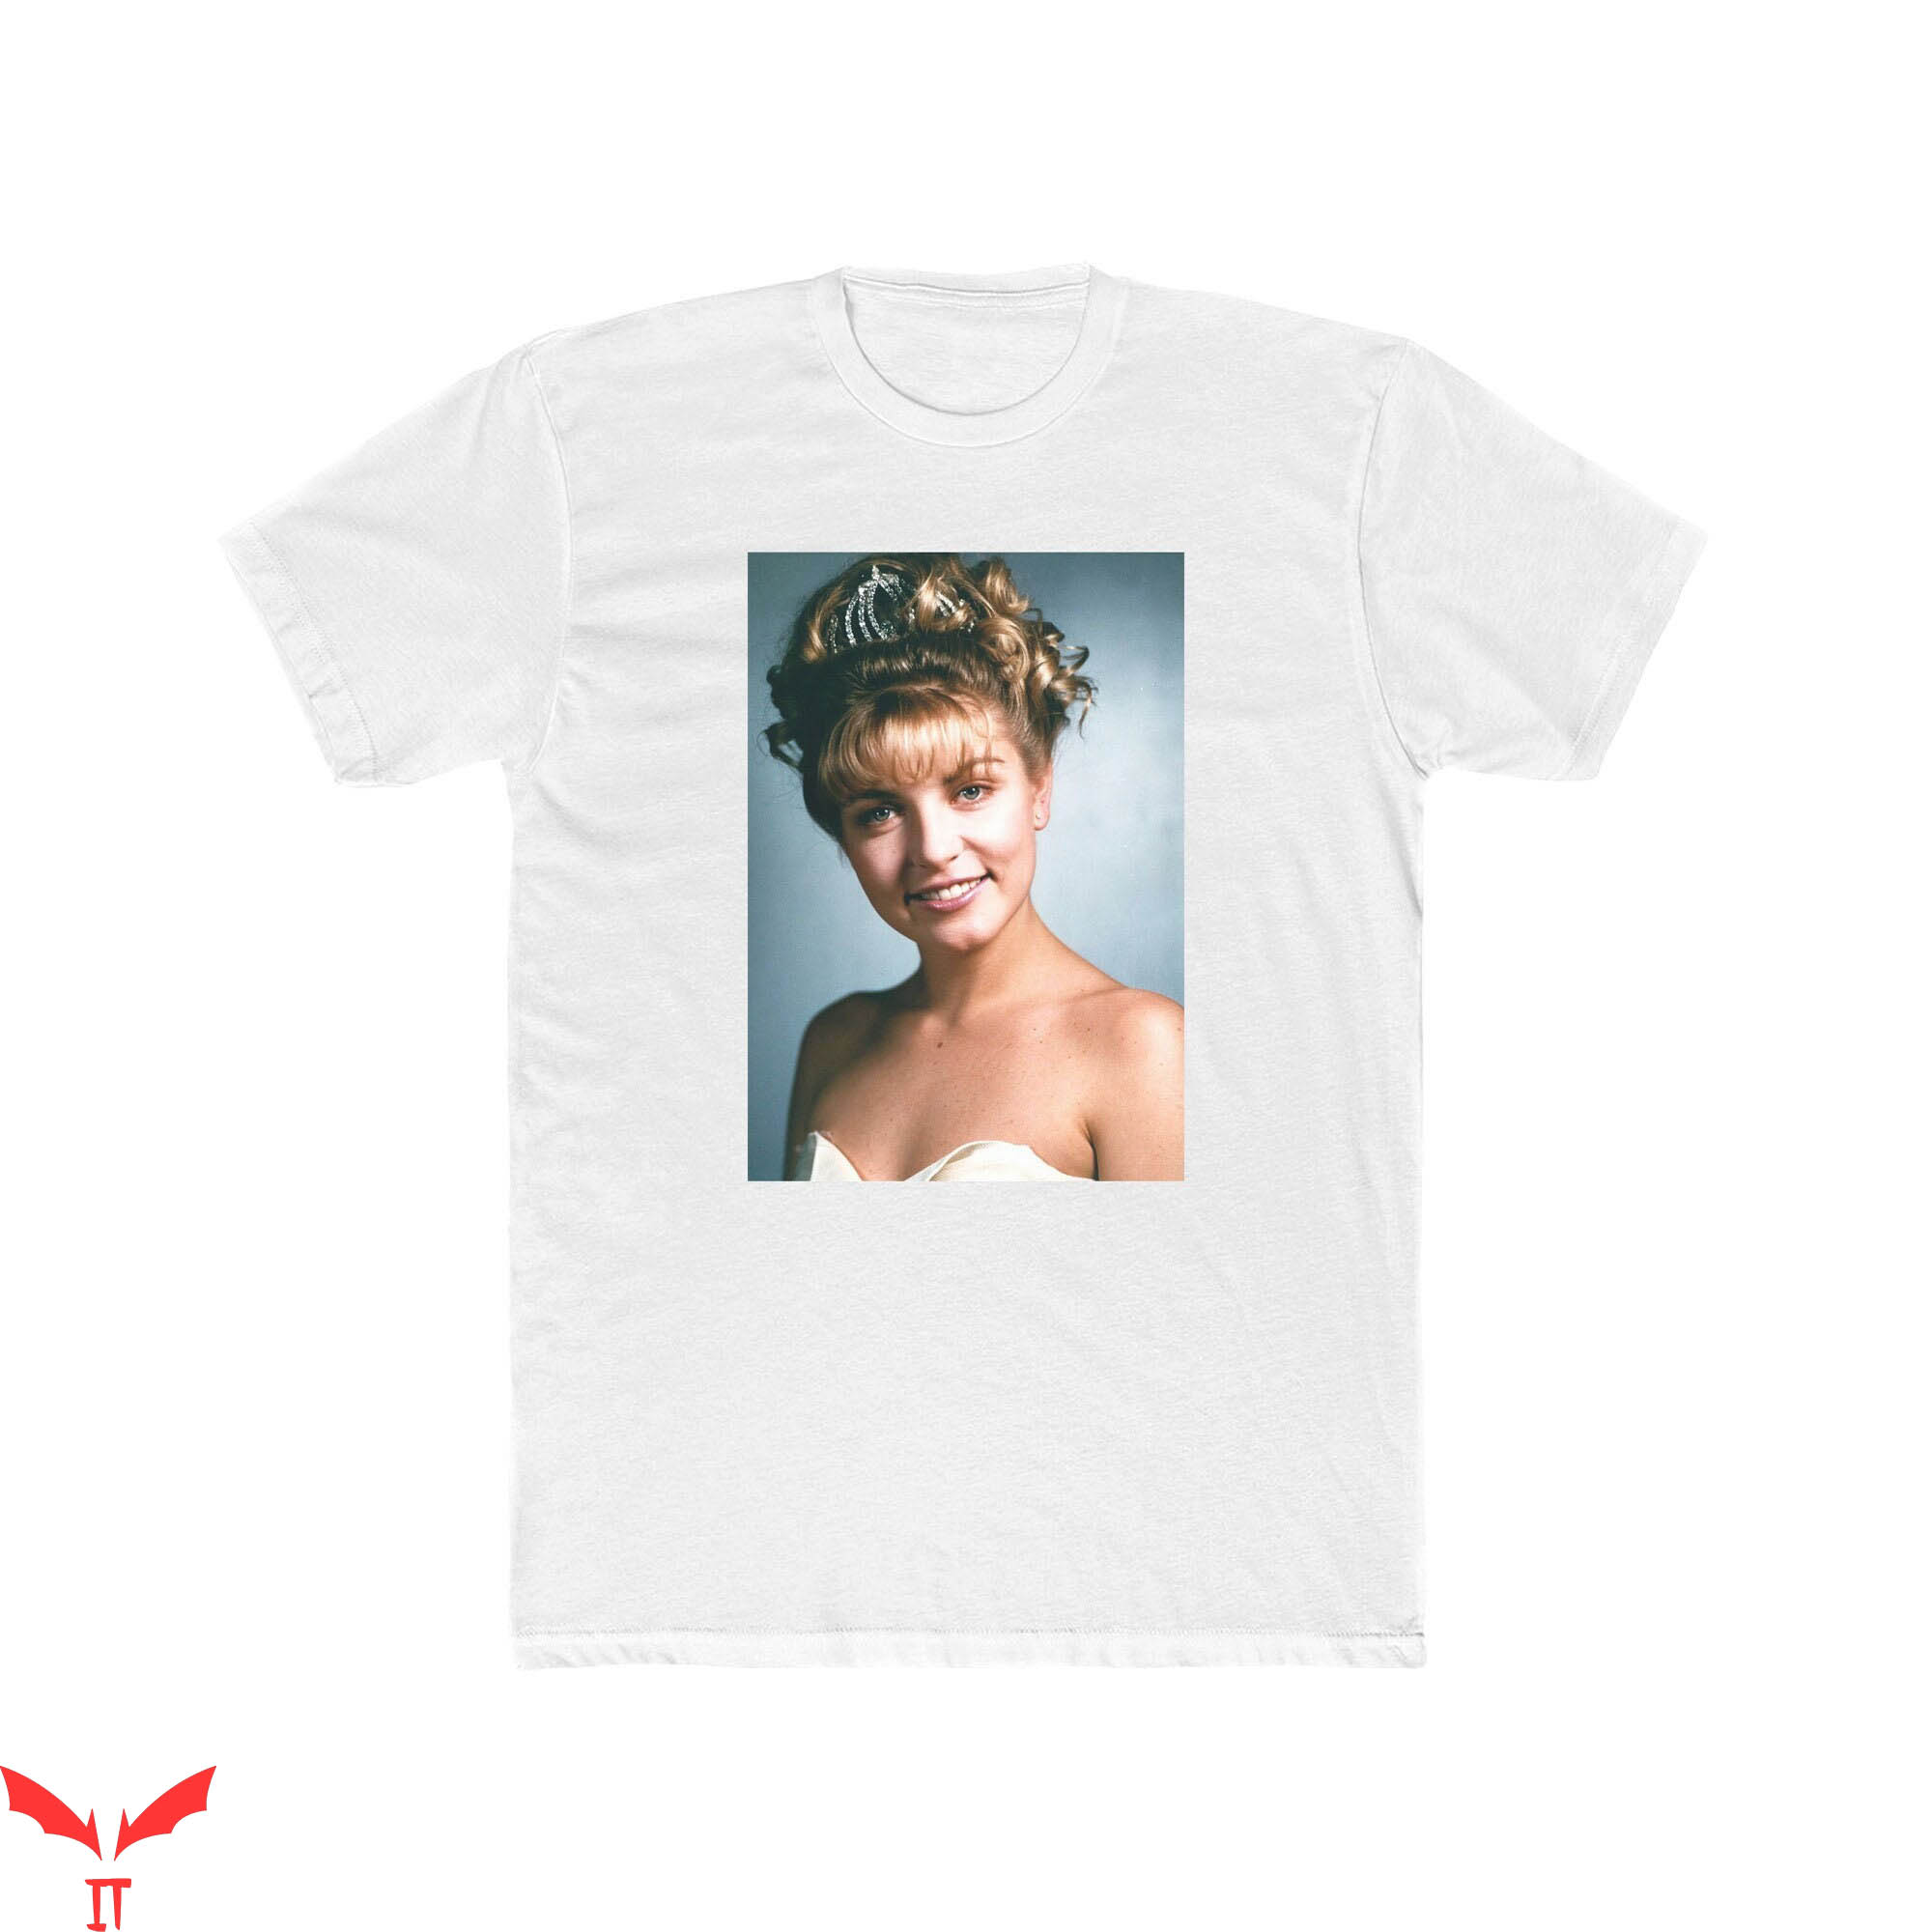 Who Drink Arnold Palmer T-Shirt Twink Peaks Laura Palmer